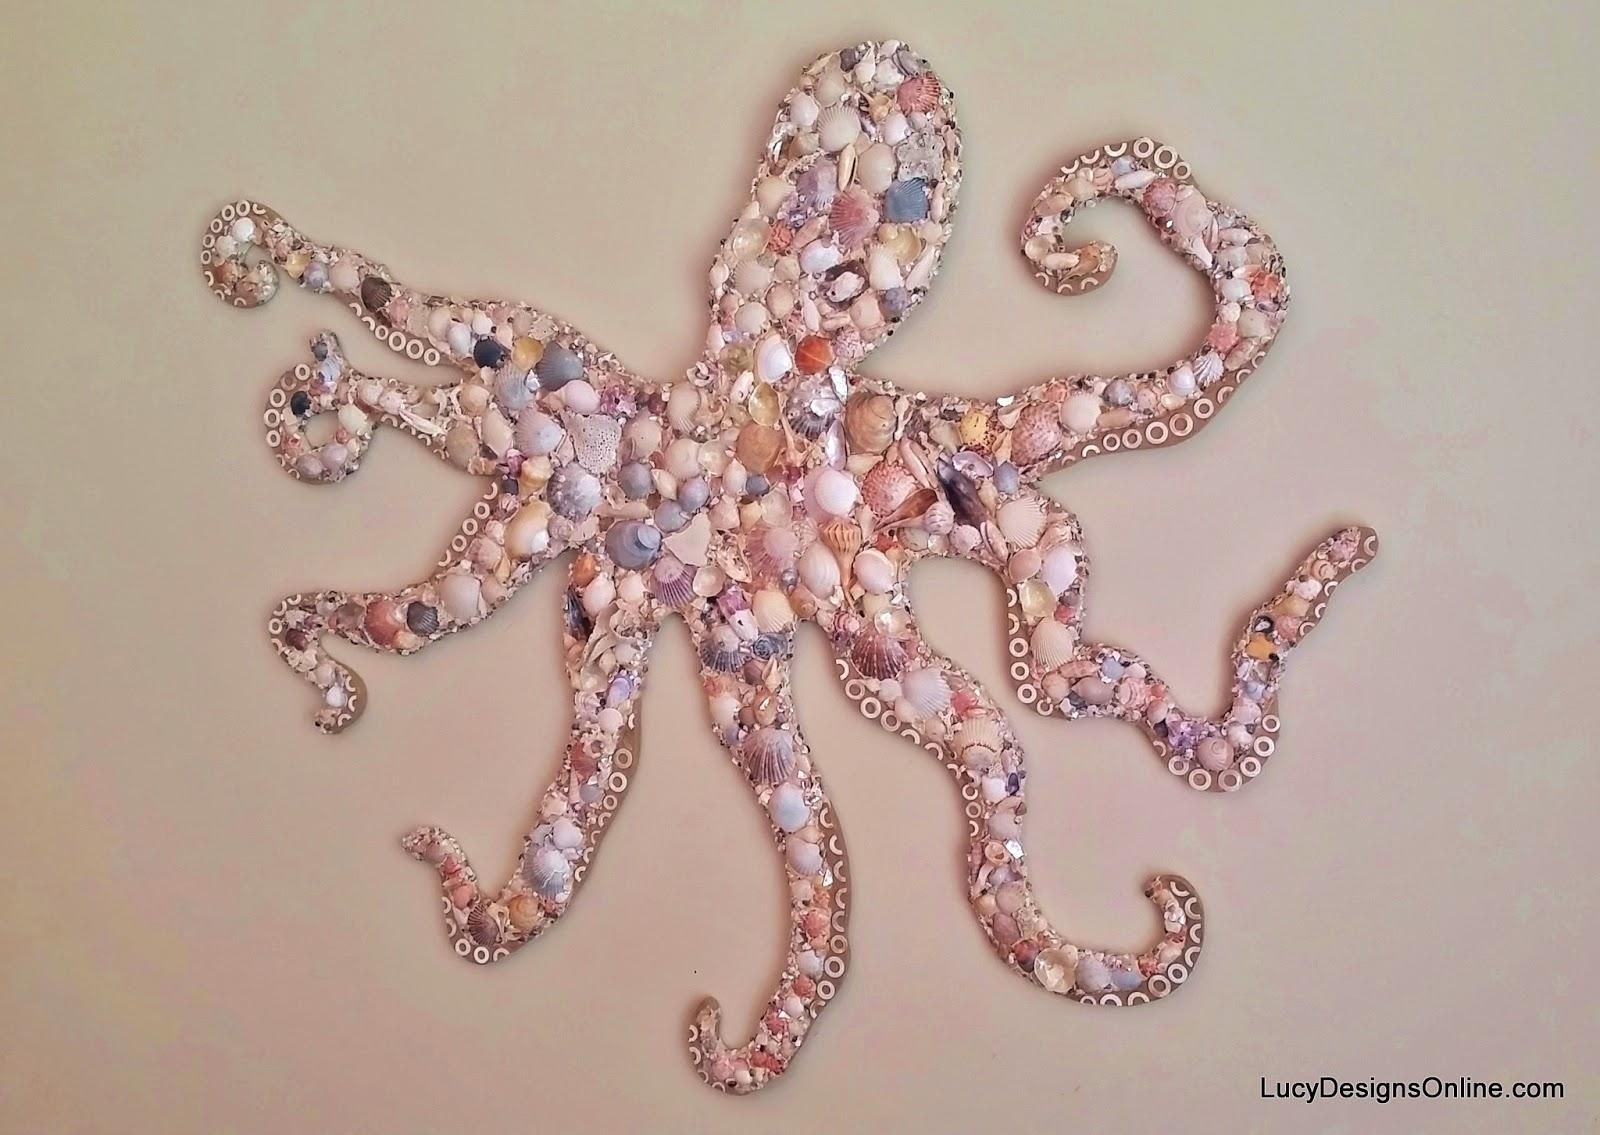 Octopus, Seahorse And Sea Turtle Wall Art, Stained Glass And With Regard To Wall Art With Seashells (View 5 of 20)